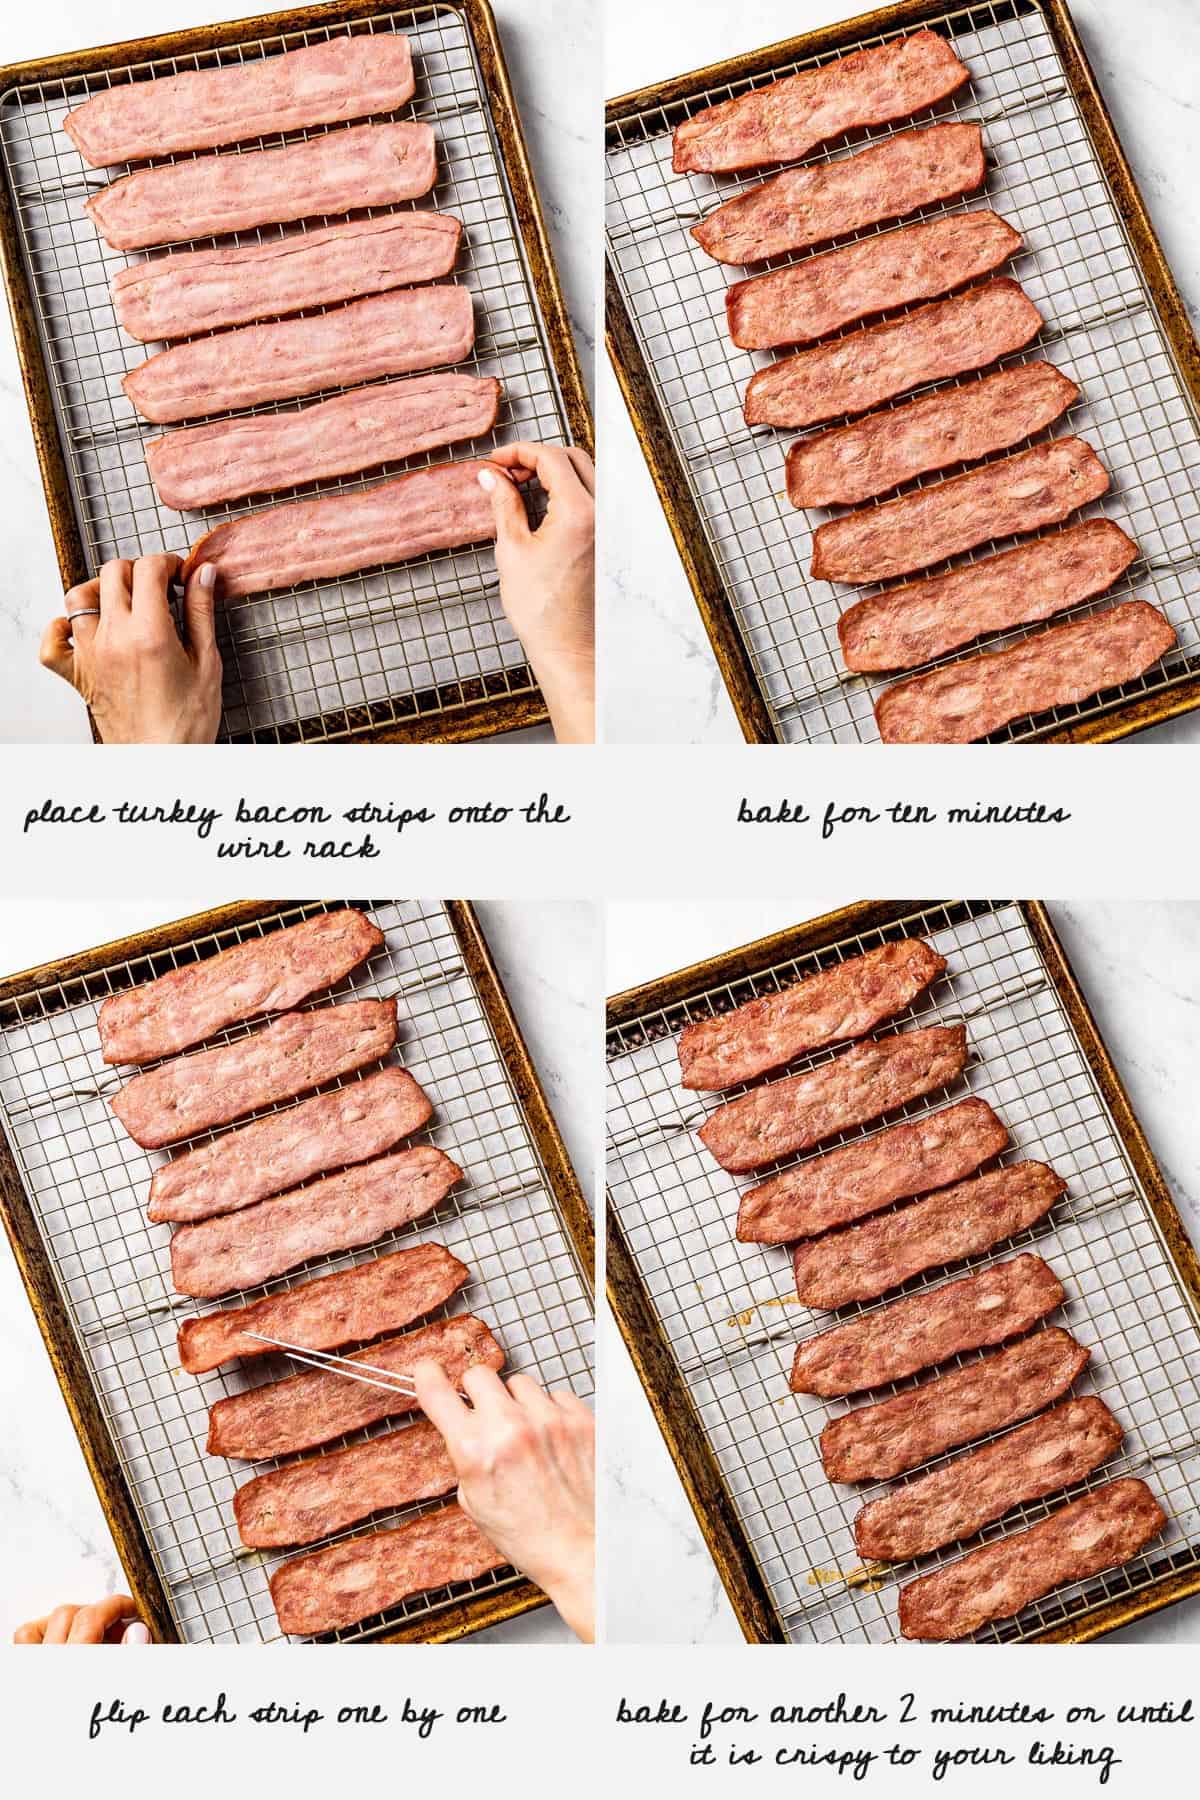 turkey bacon oven directions shown in four photos with how to text on the image